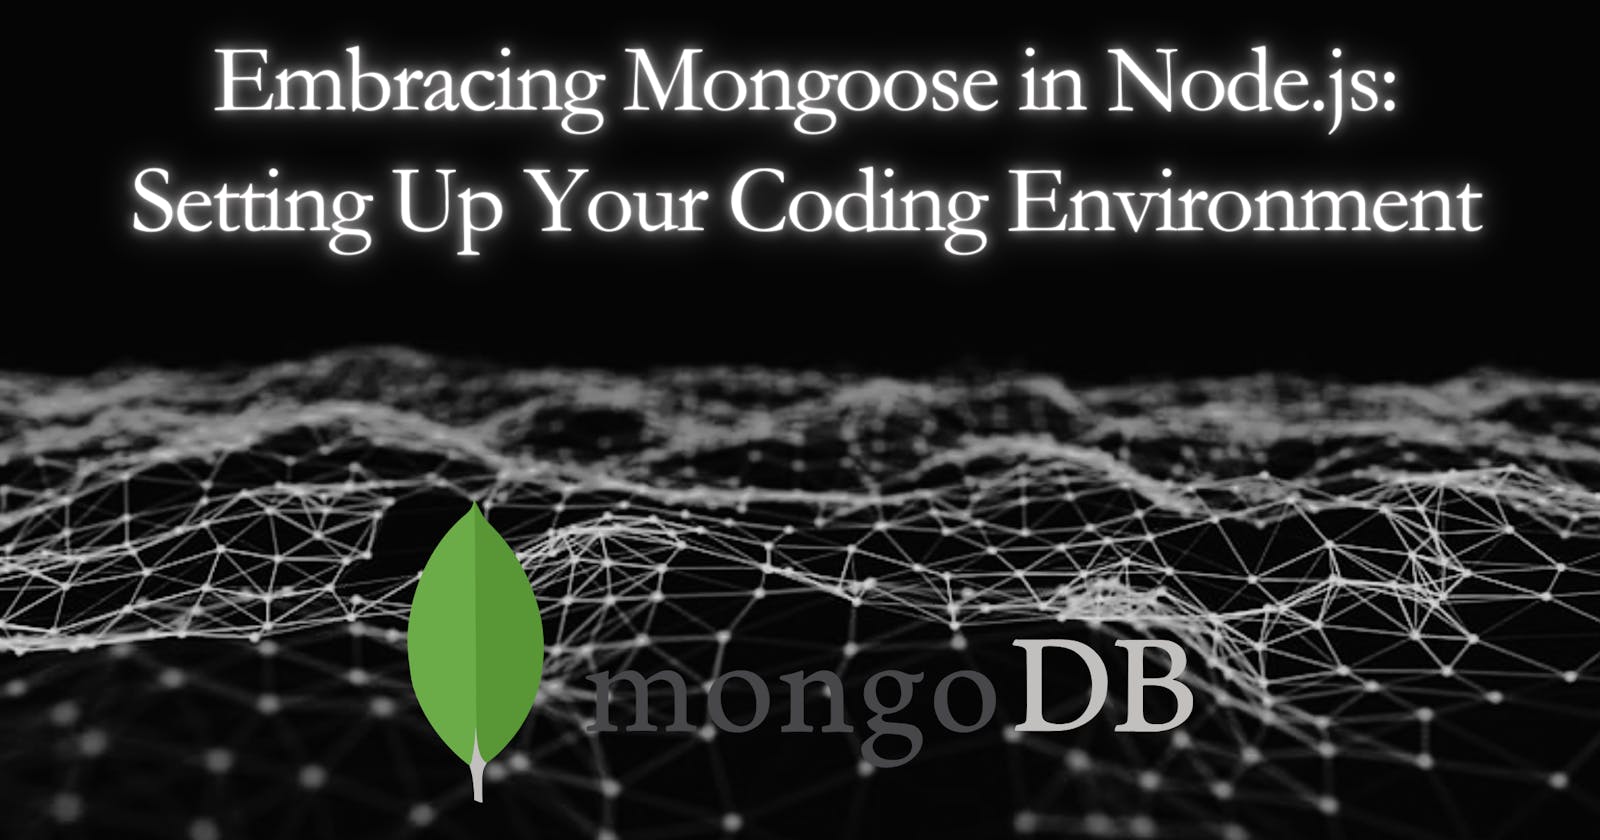 Embracing Mongoose in Node.js: Setting Up Your Coding Environment